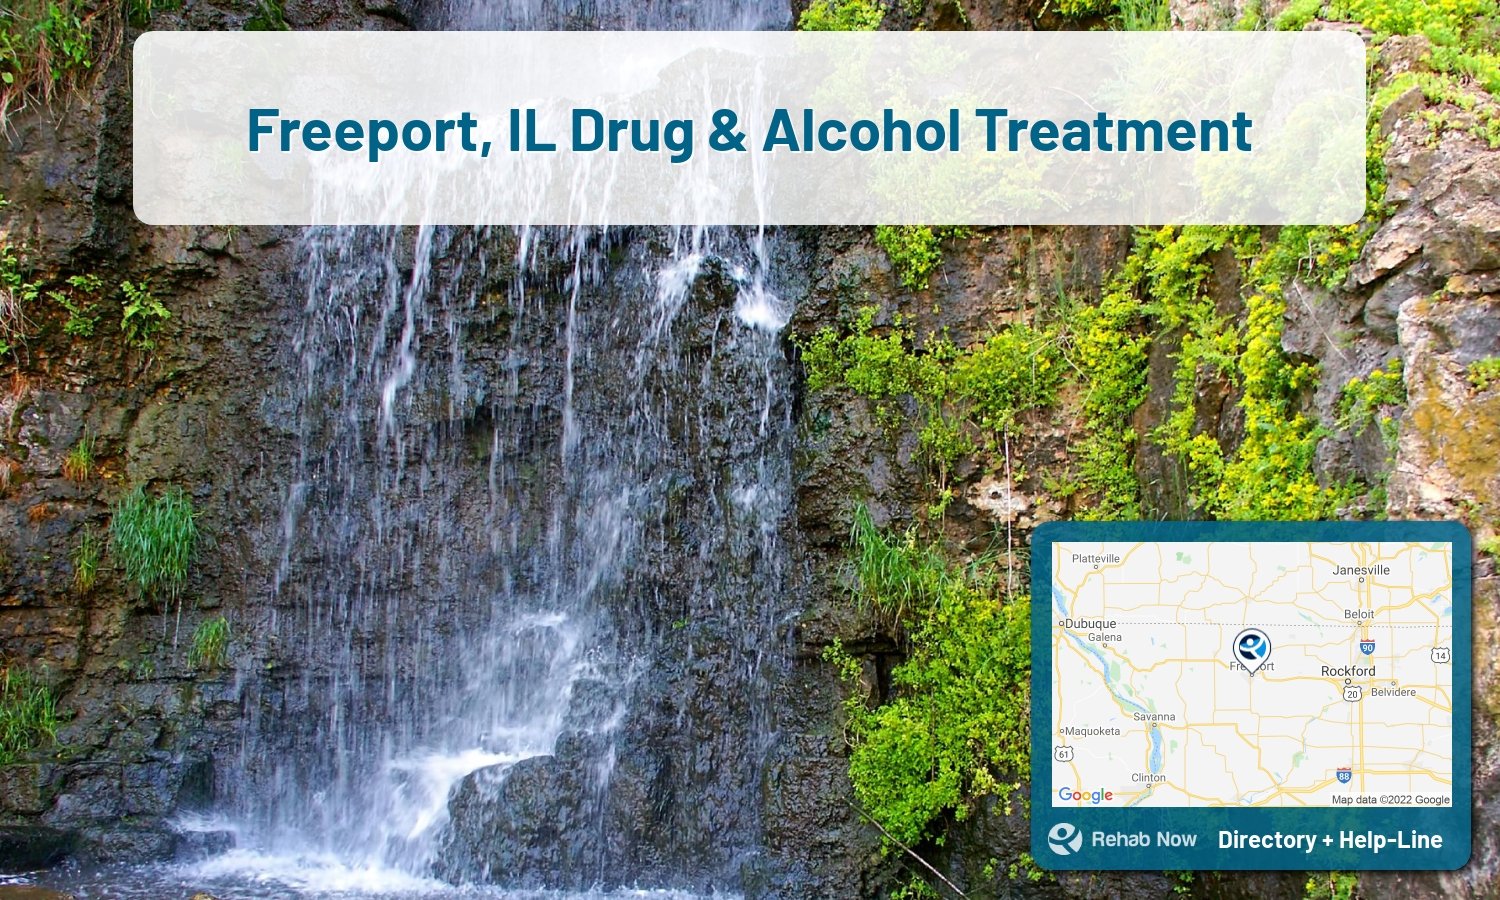 Freeport, IL Treatment Centers. Find drug rehab in Freeport, Illinois, or detox and treatment programs. Get the right help now!